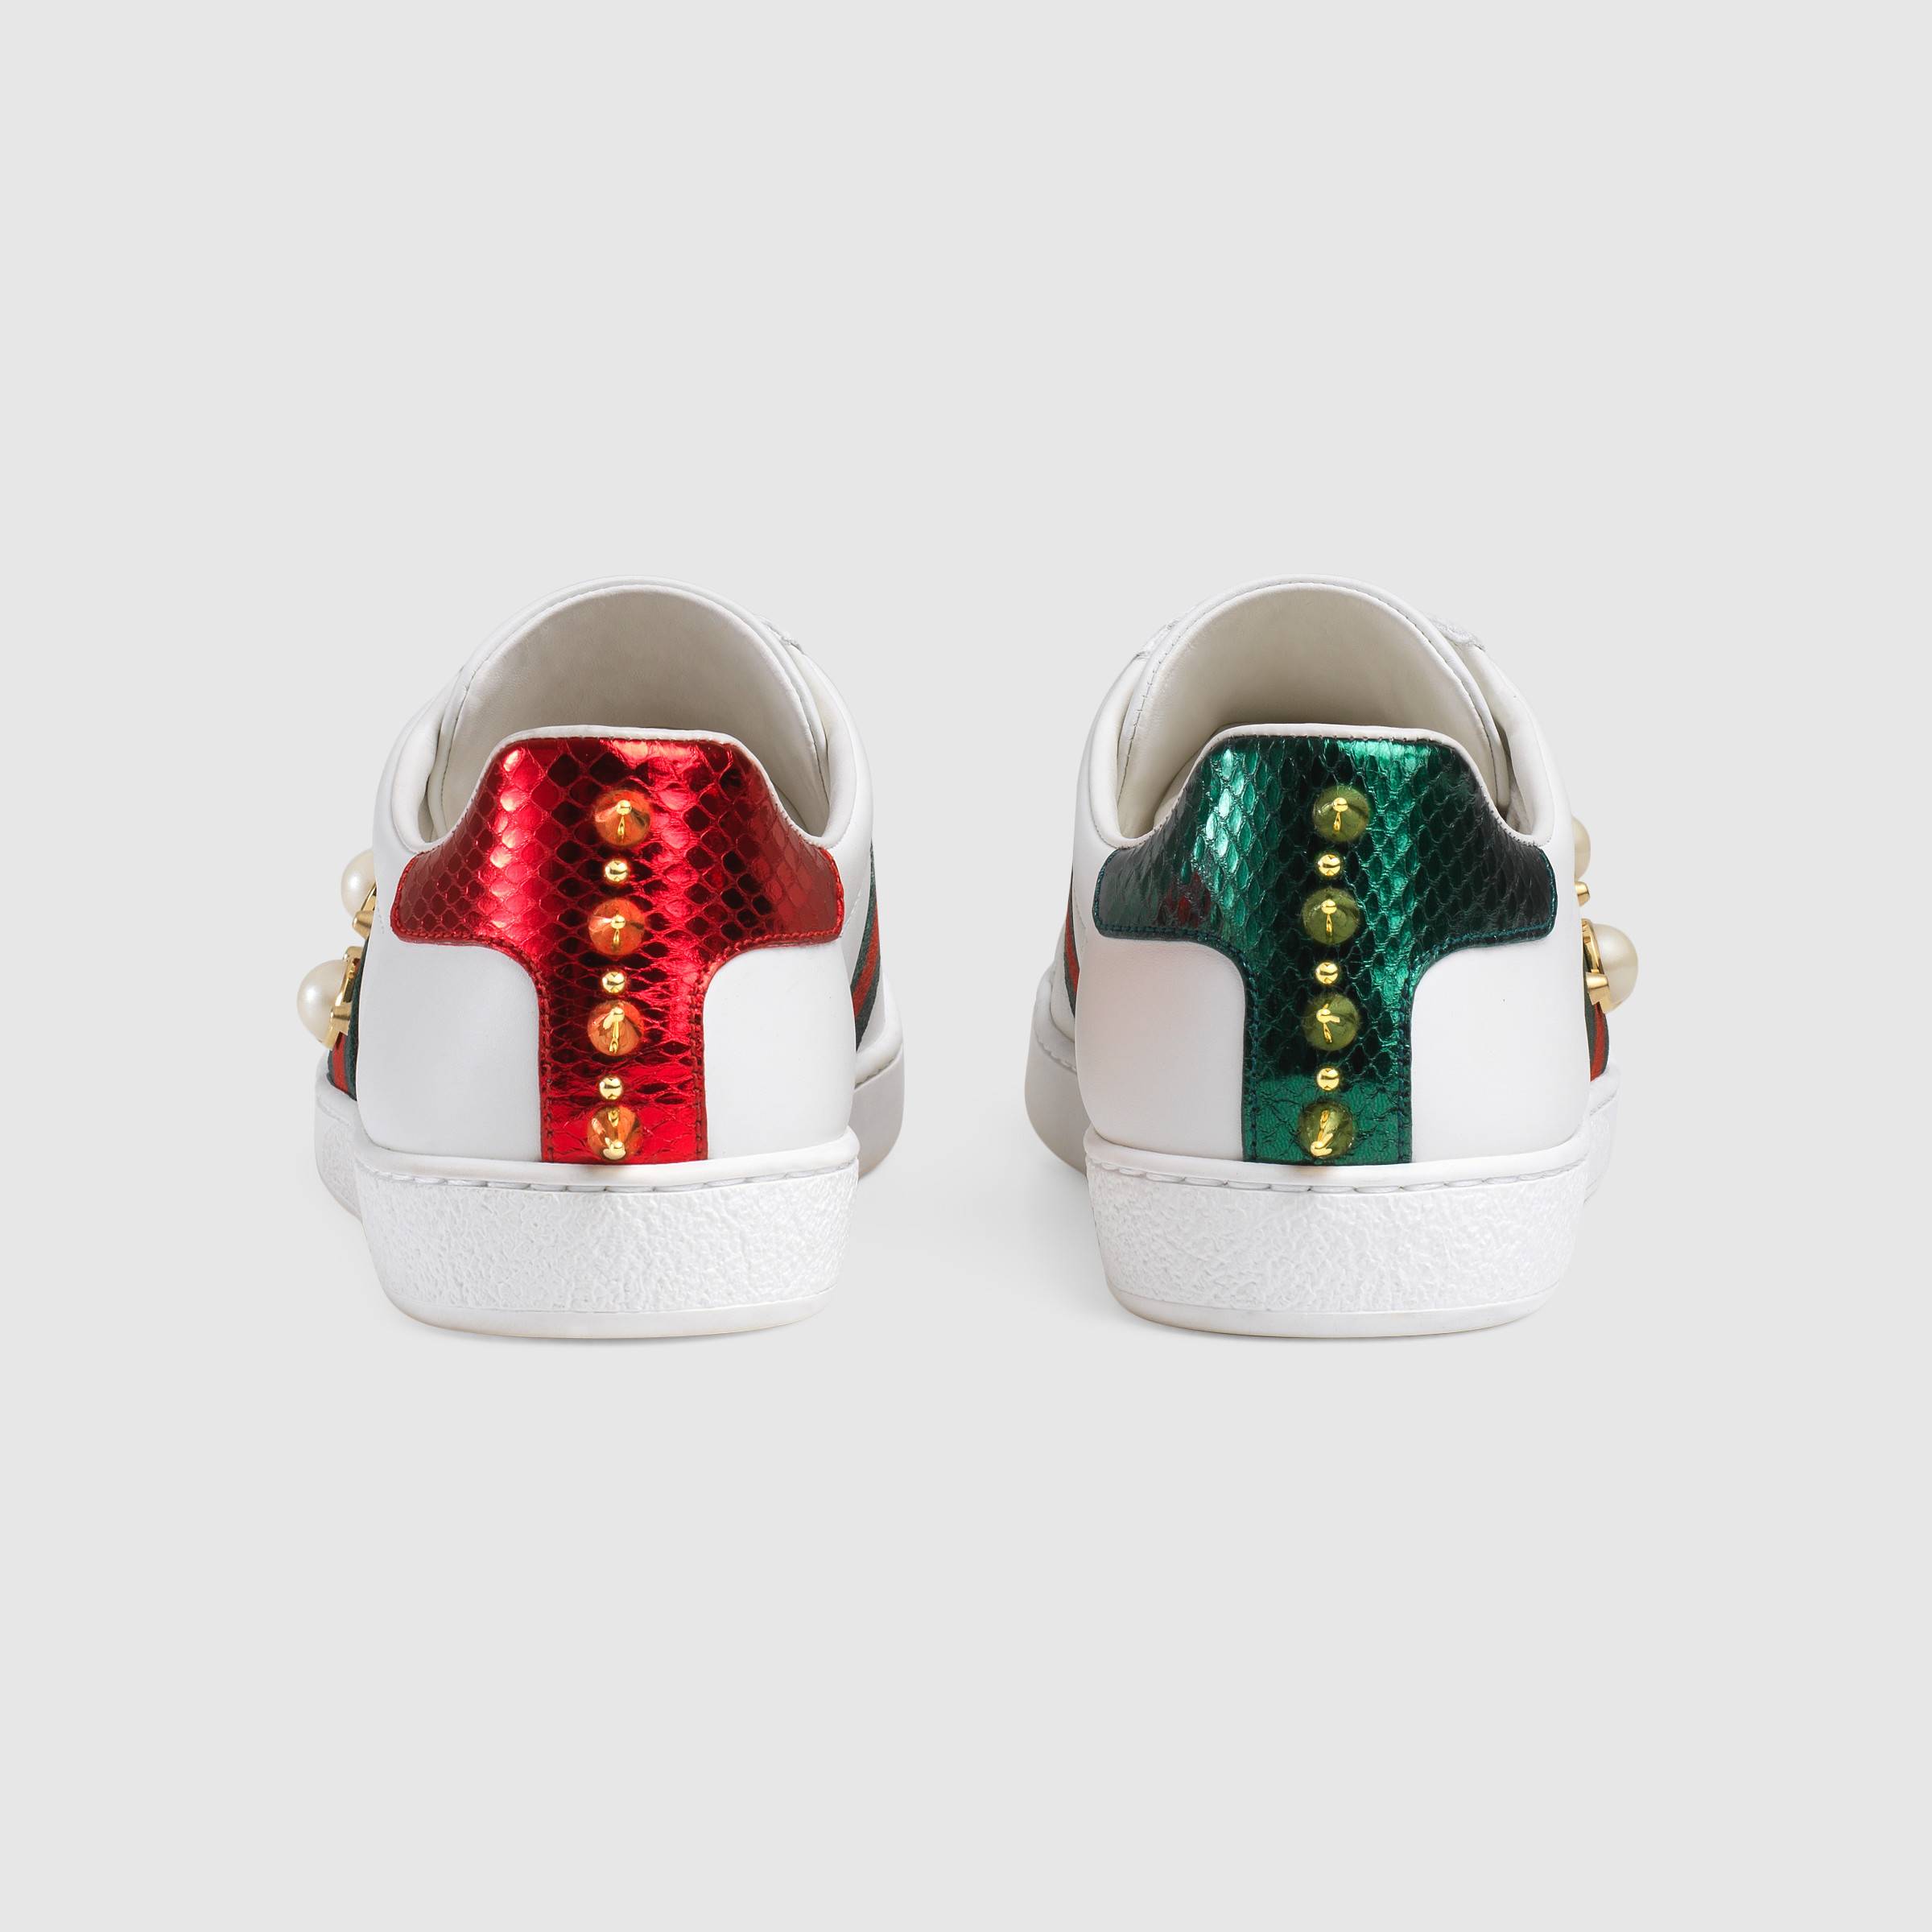 GIÀY GUCCI - ACE SYUDDED LEATHER SNEAKER WITH PEARLS ANDSTUDS